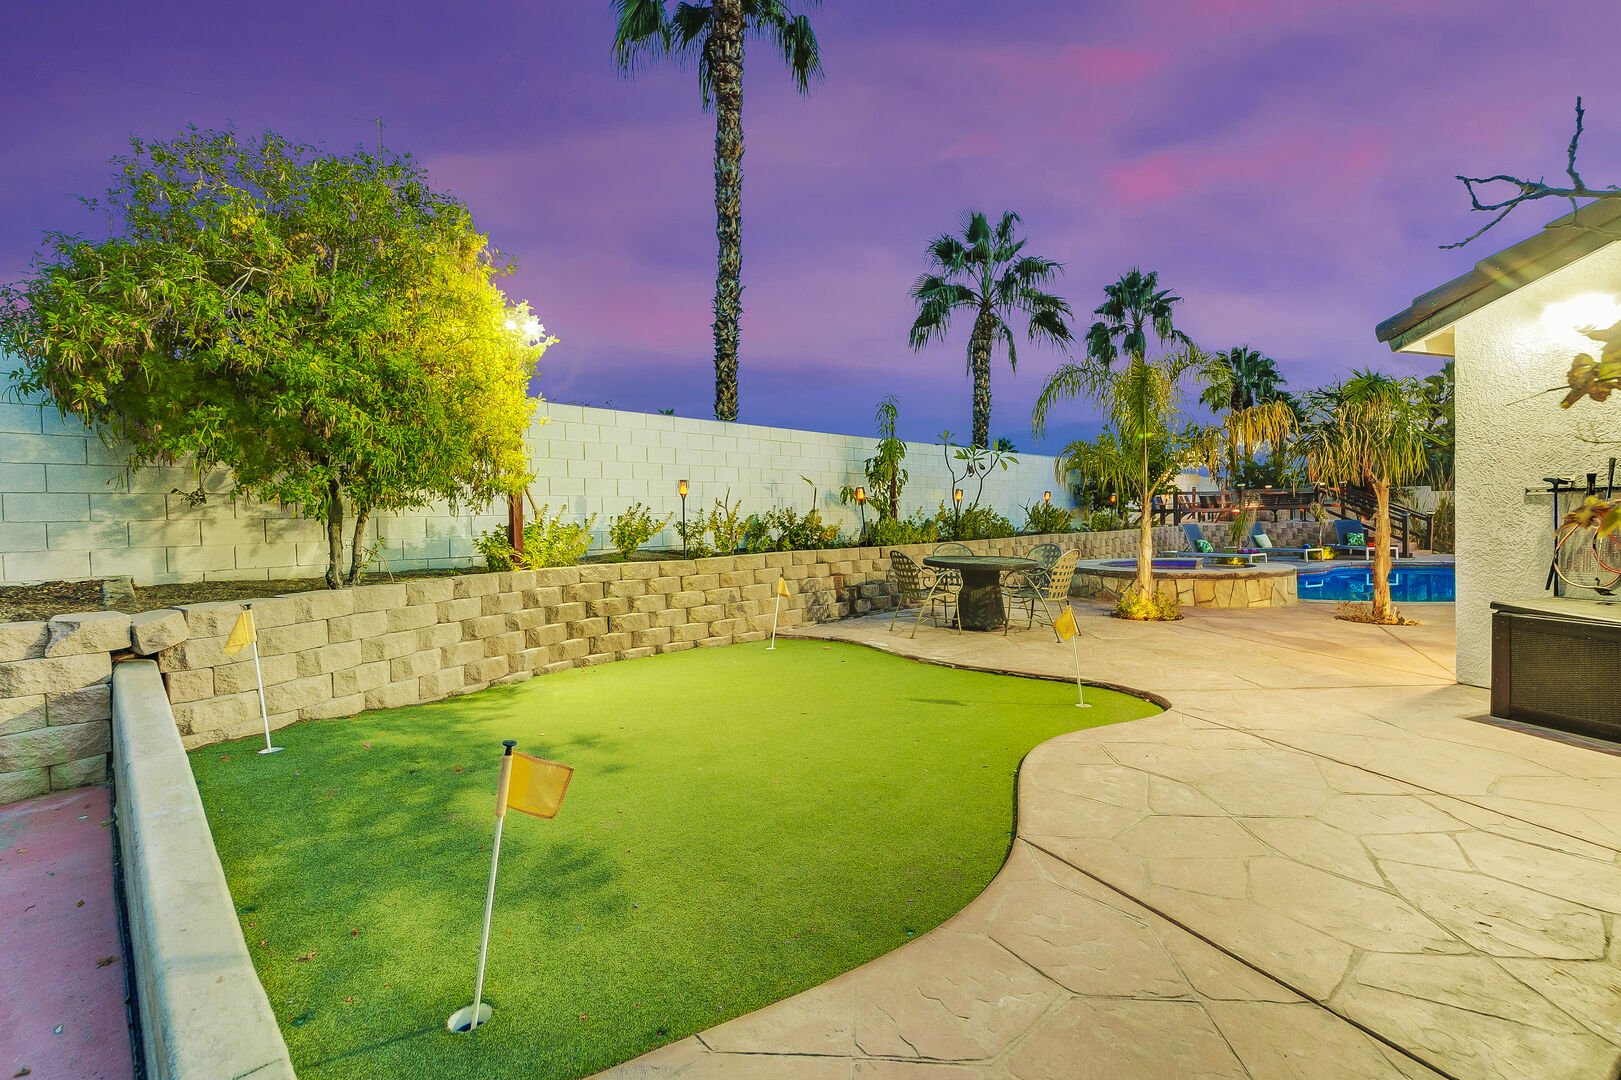 The second putting green just behind the pool features 4 holes!